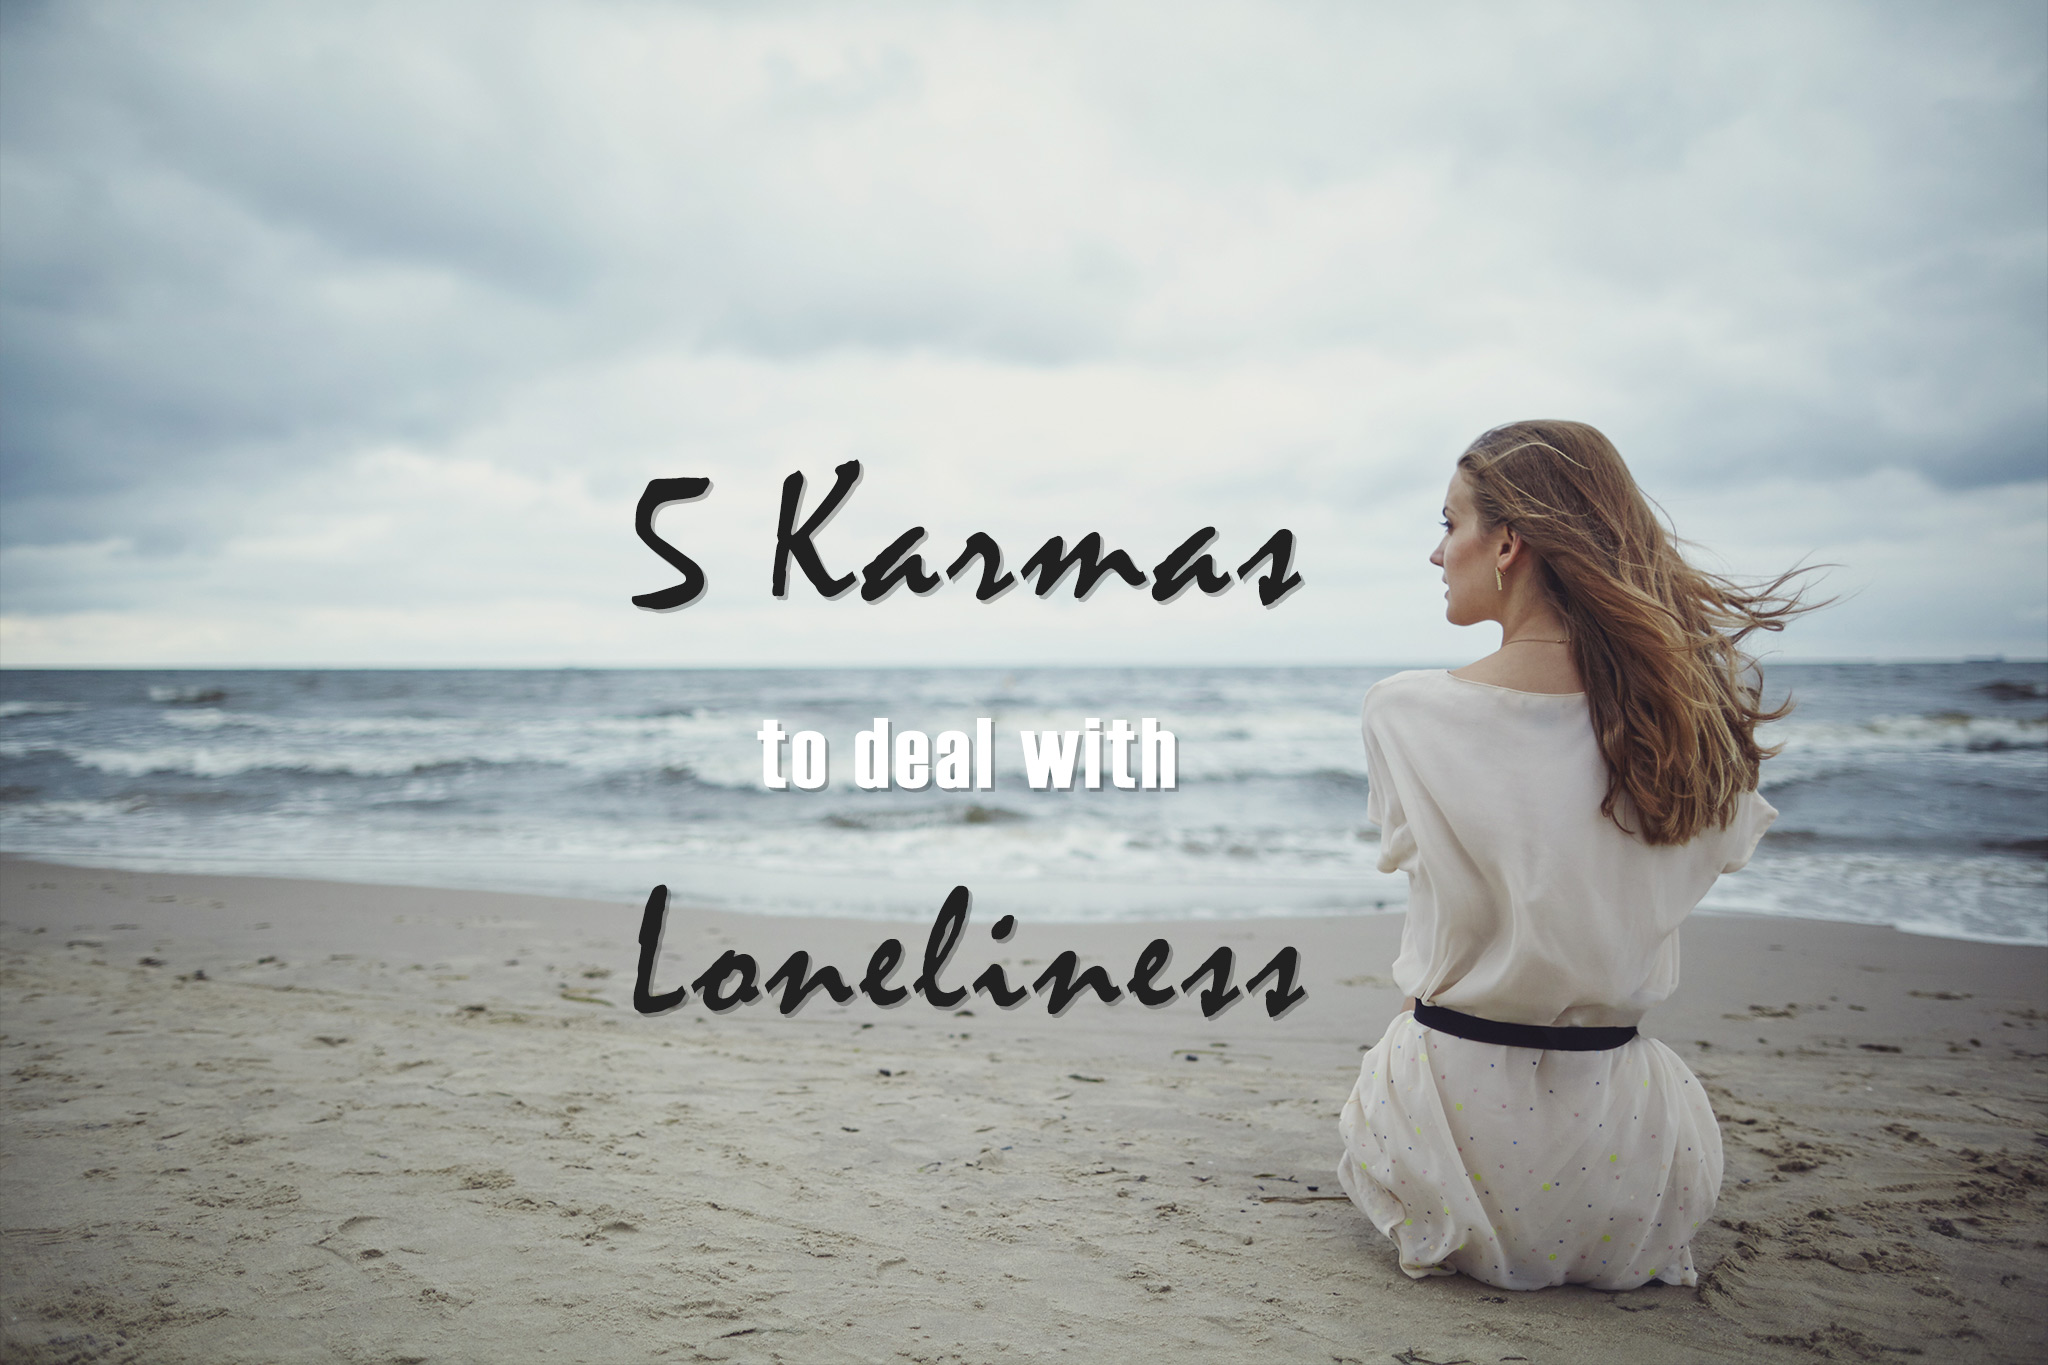 image from Five Karmas to Deal with Loneliness